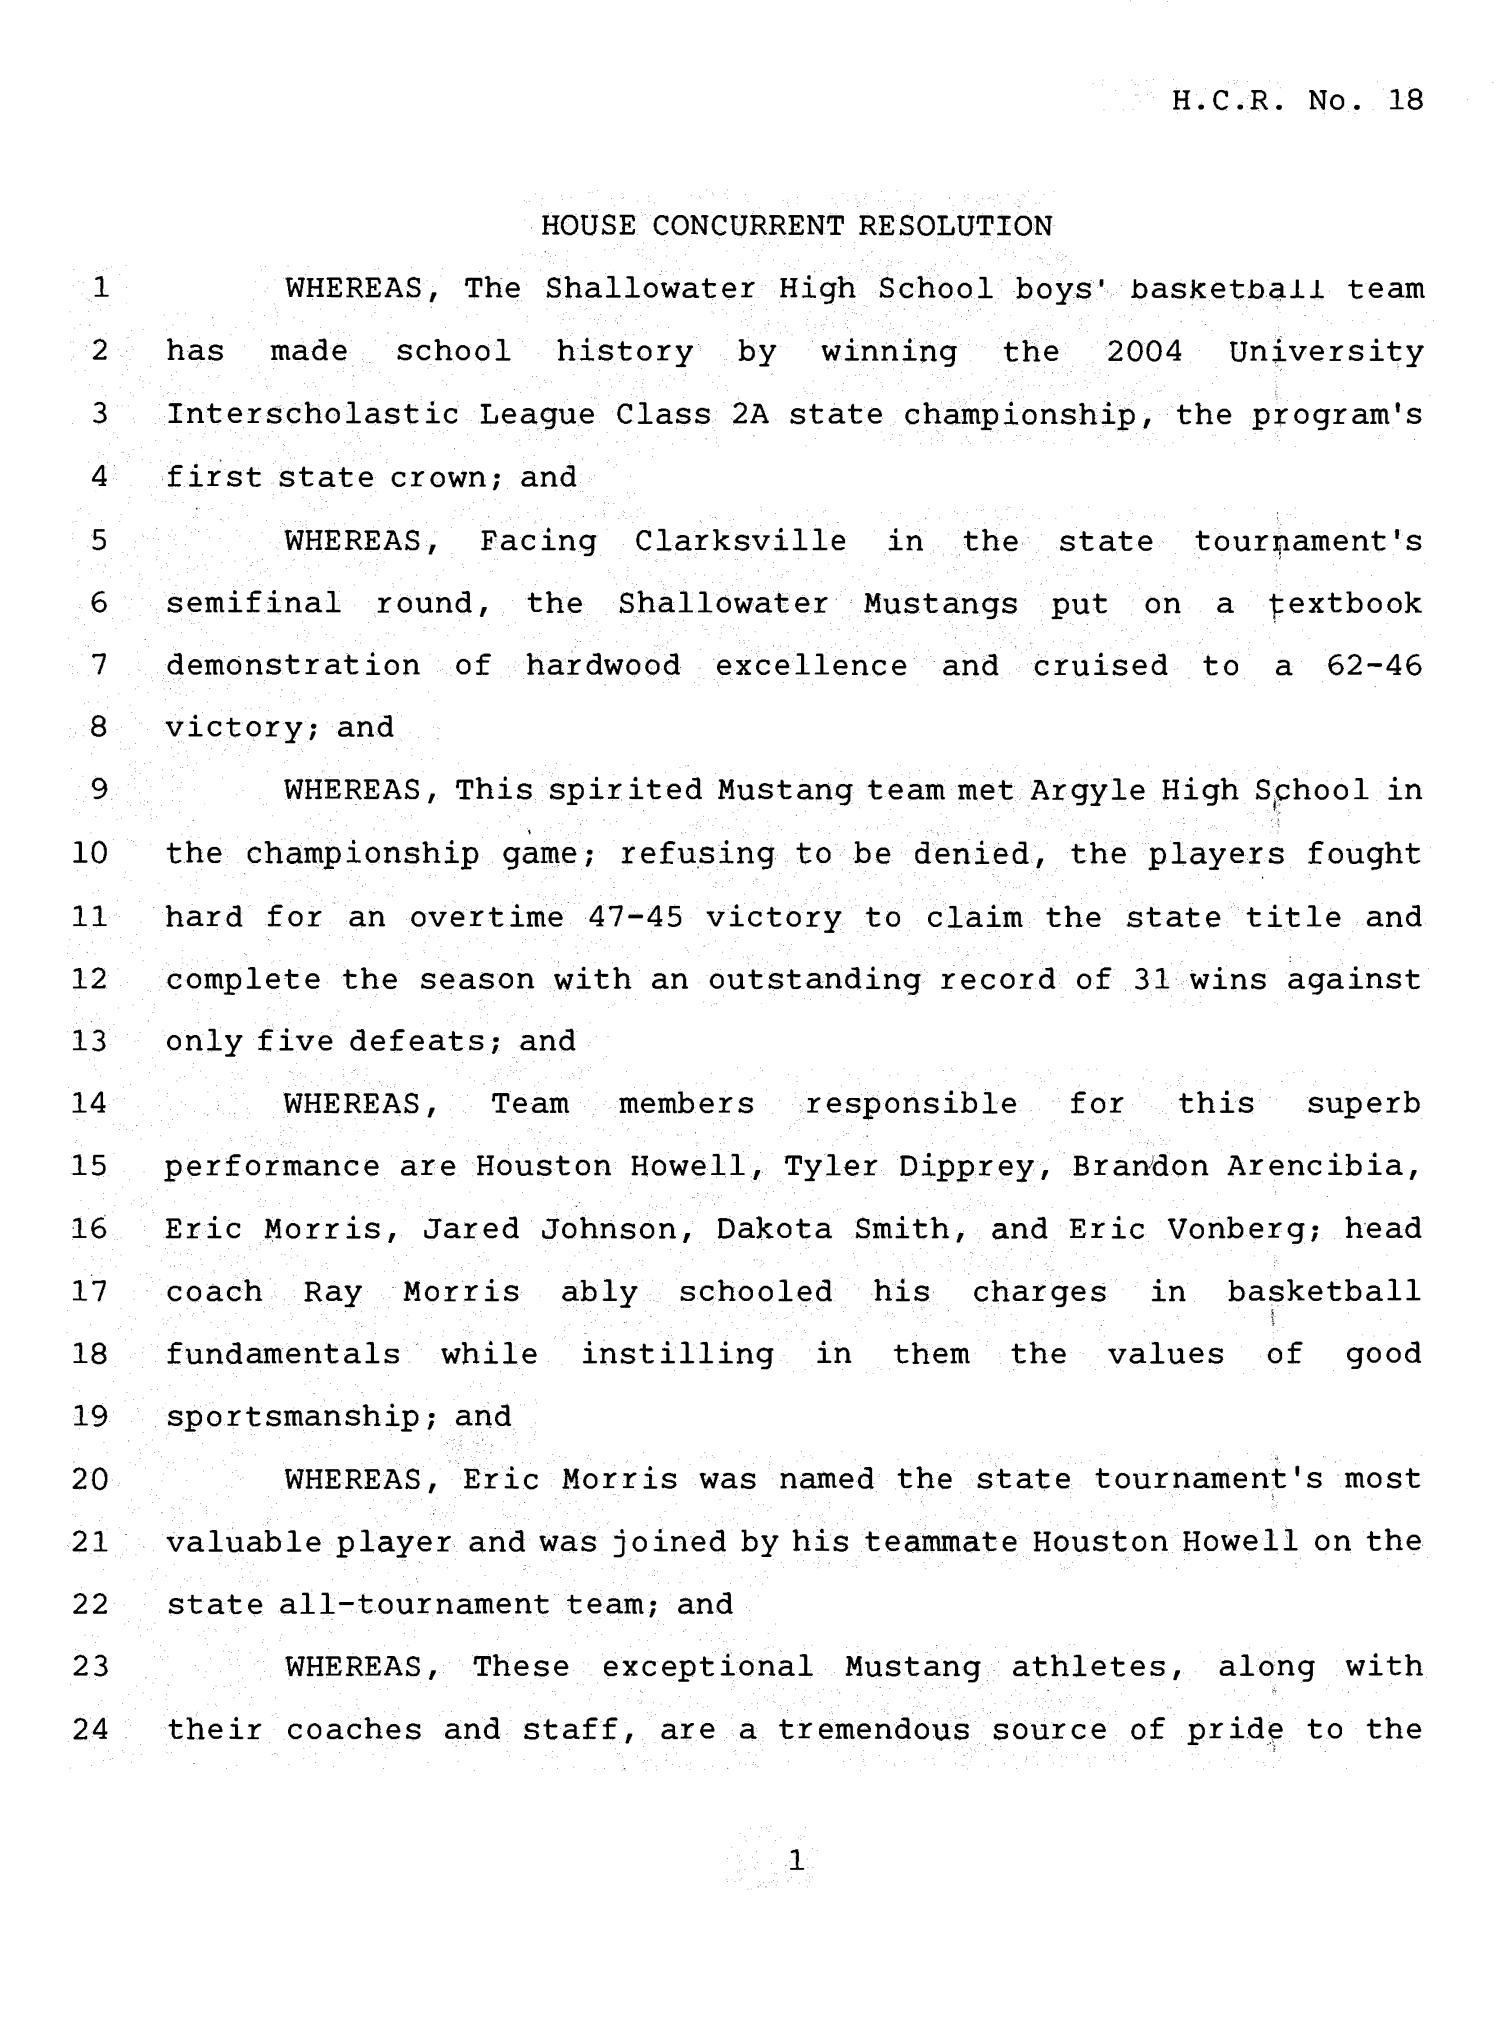 78th Texas Legislature, Fourth Called Session, House Concurrent Resolution 18
                                                
                                                    [Sequence #]: 1 of 3
                                                